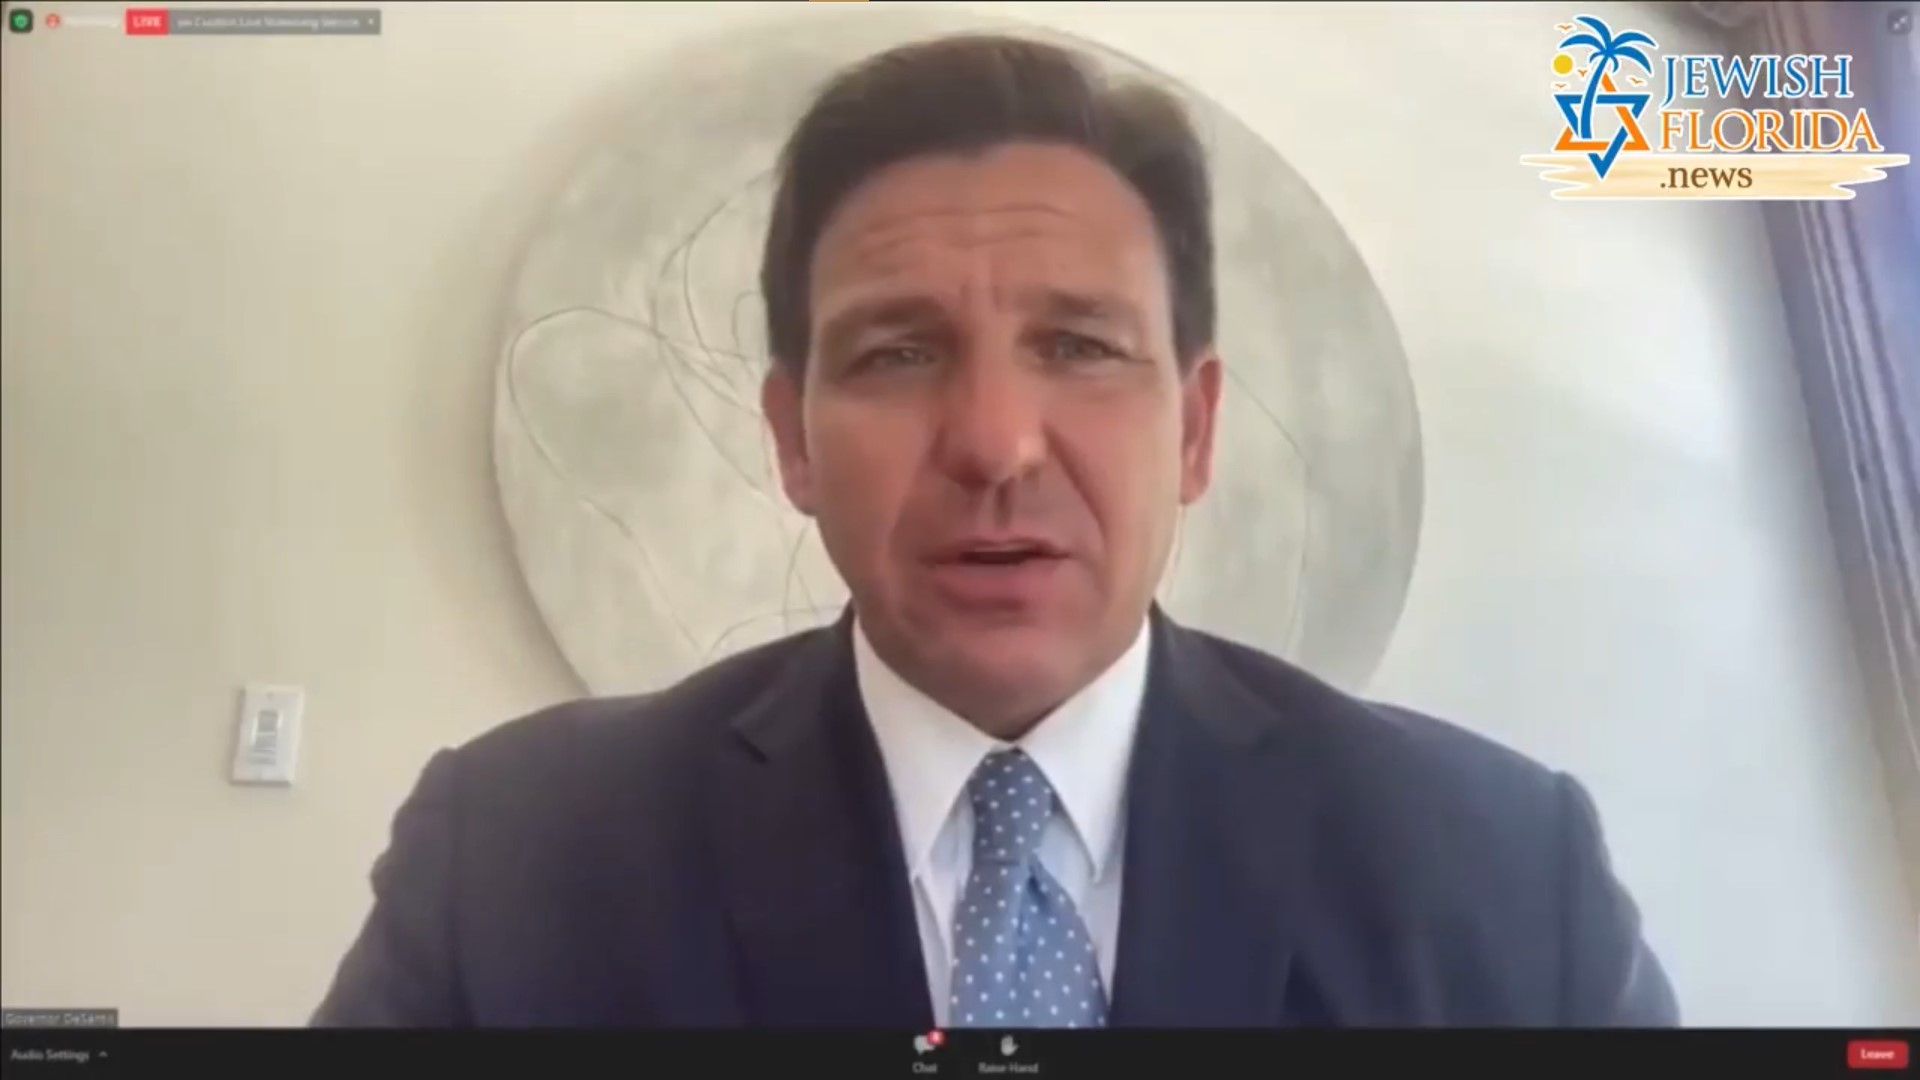 Gov. DeSantis Speaks To The Jewish Federations Of Florida About The Importance Of Stopping Antisemitism And Supporting Israel